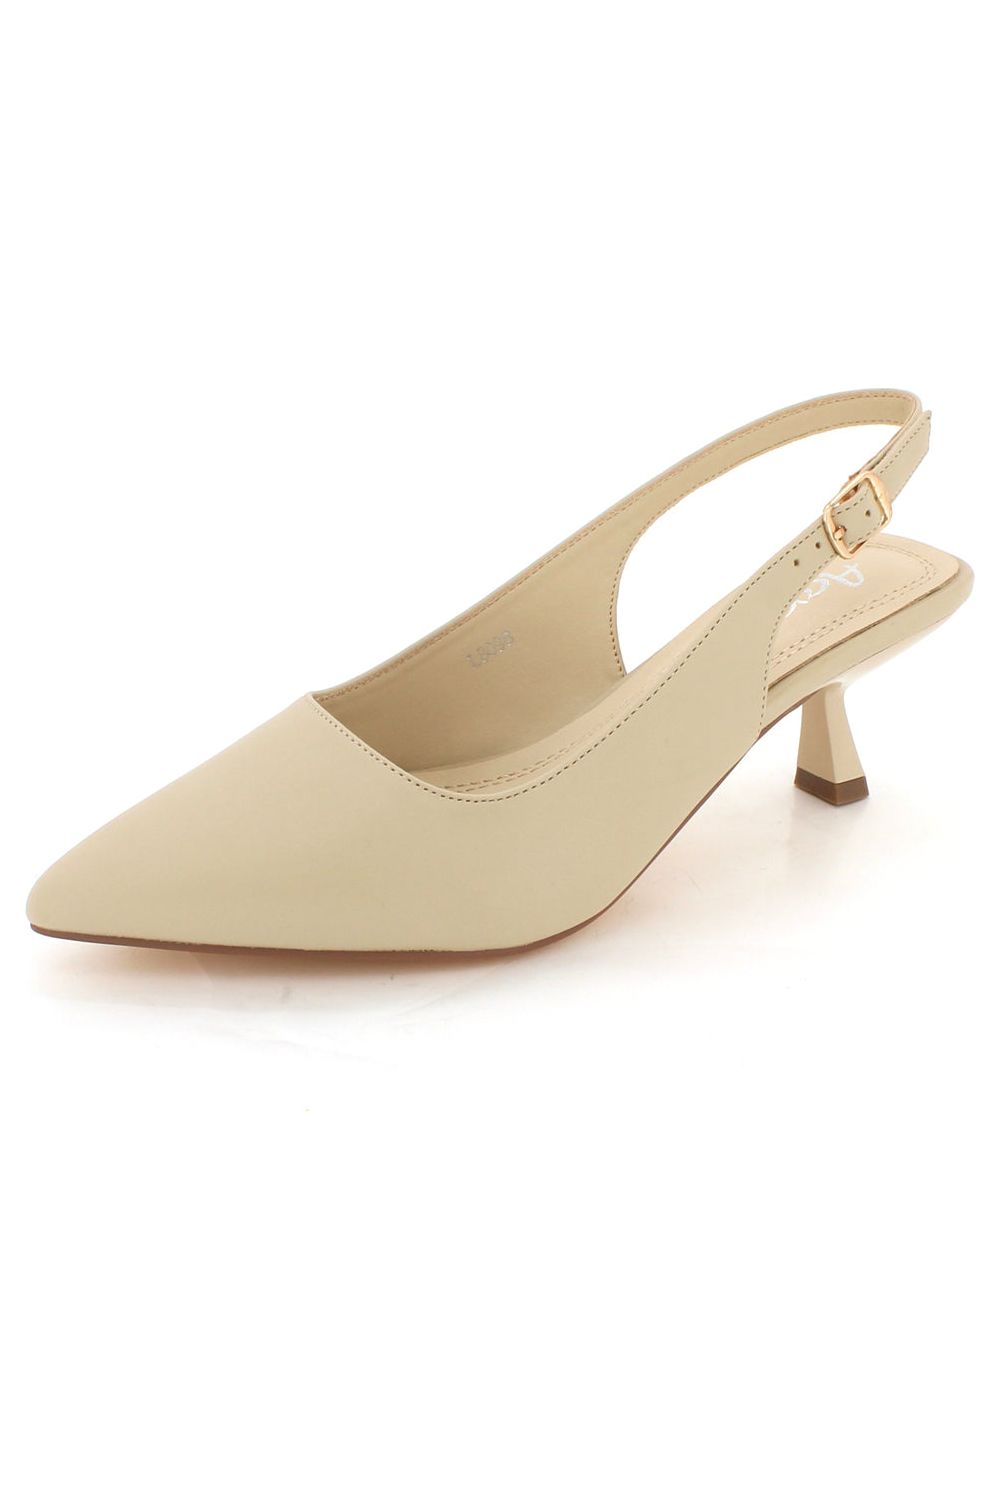 Pointed Closed Toe Evening Casual Comfort Formal Party Medium Heel Slingback L8097